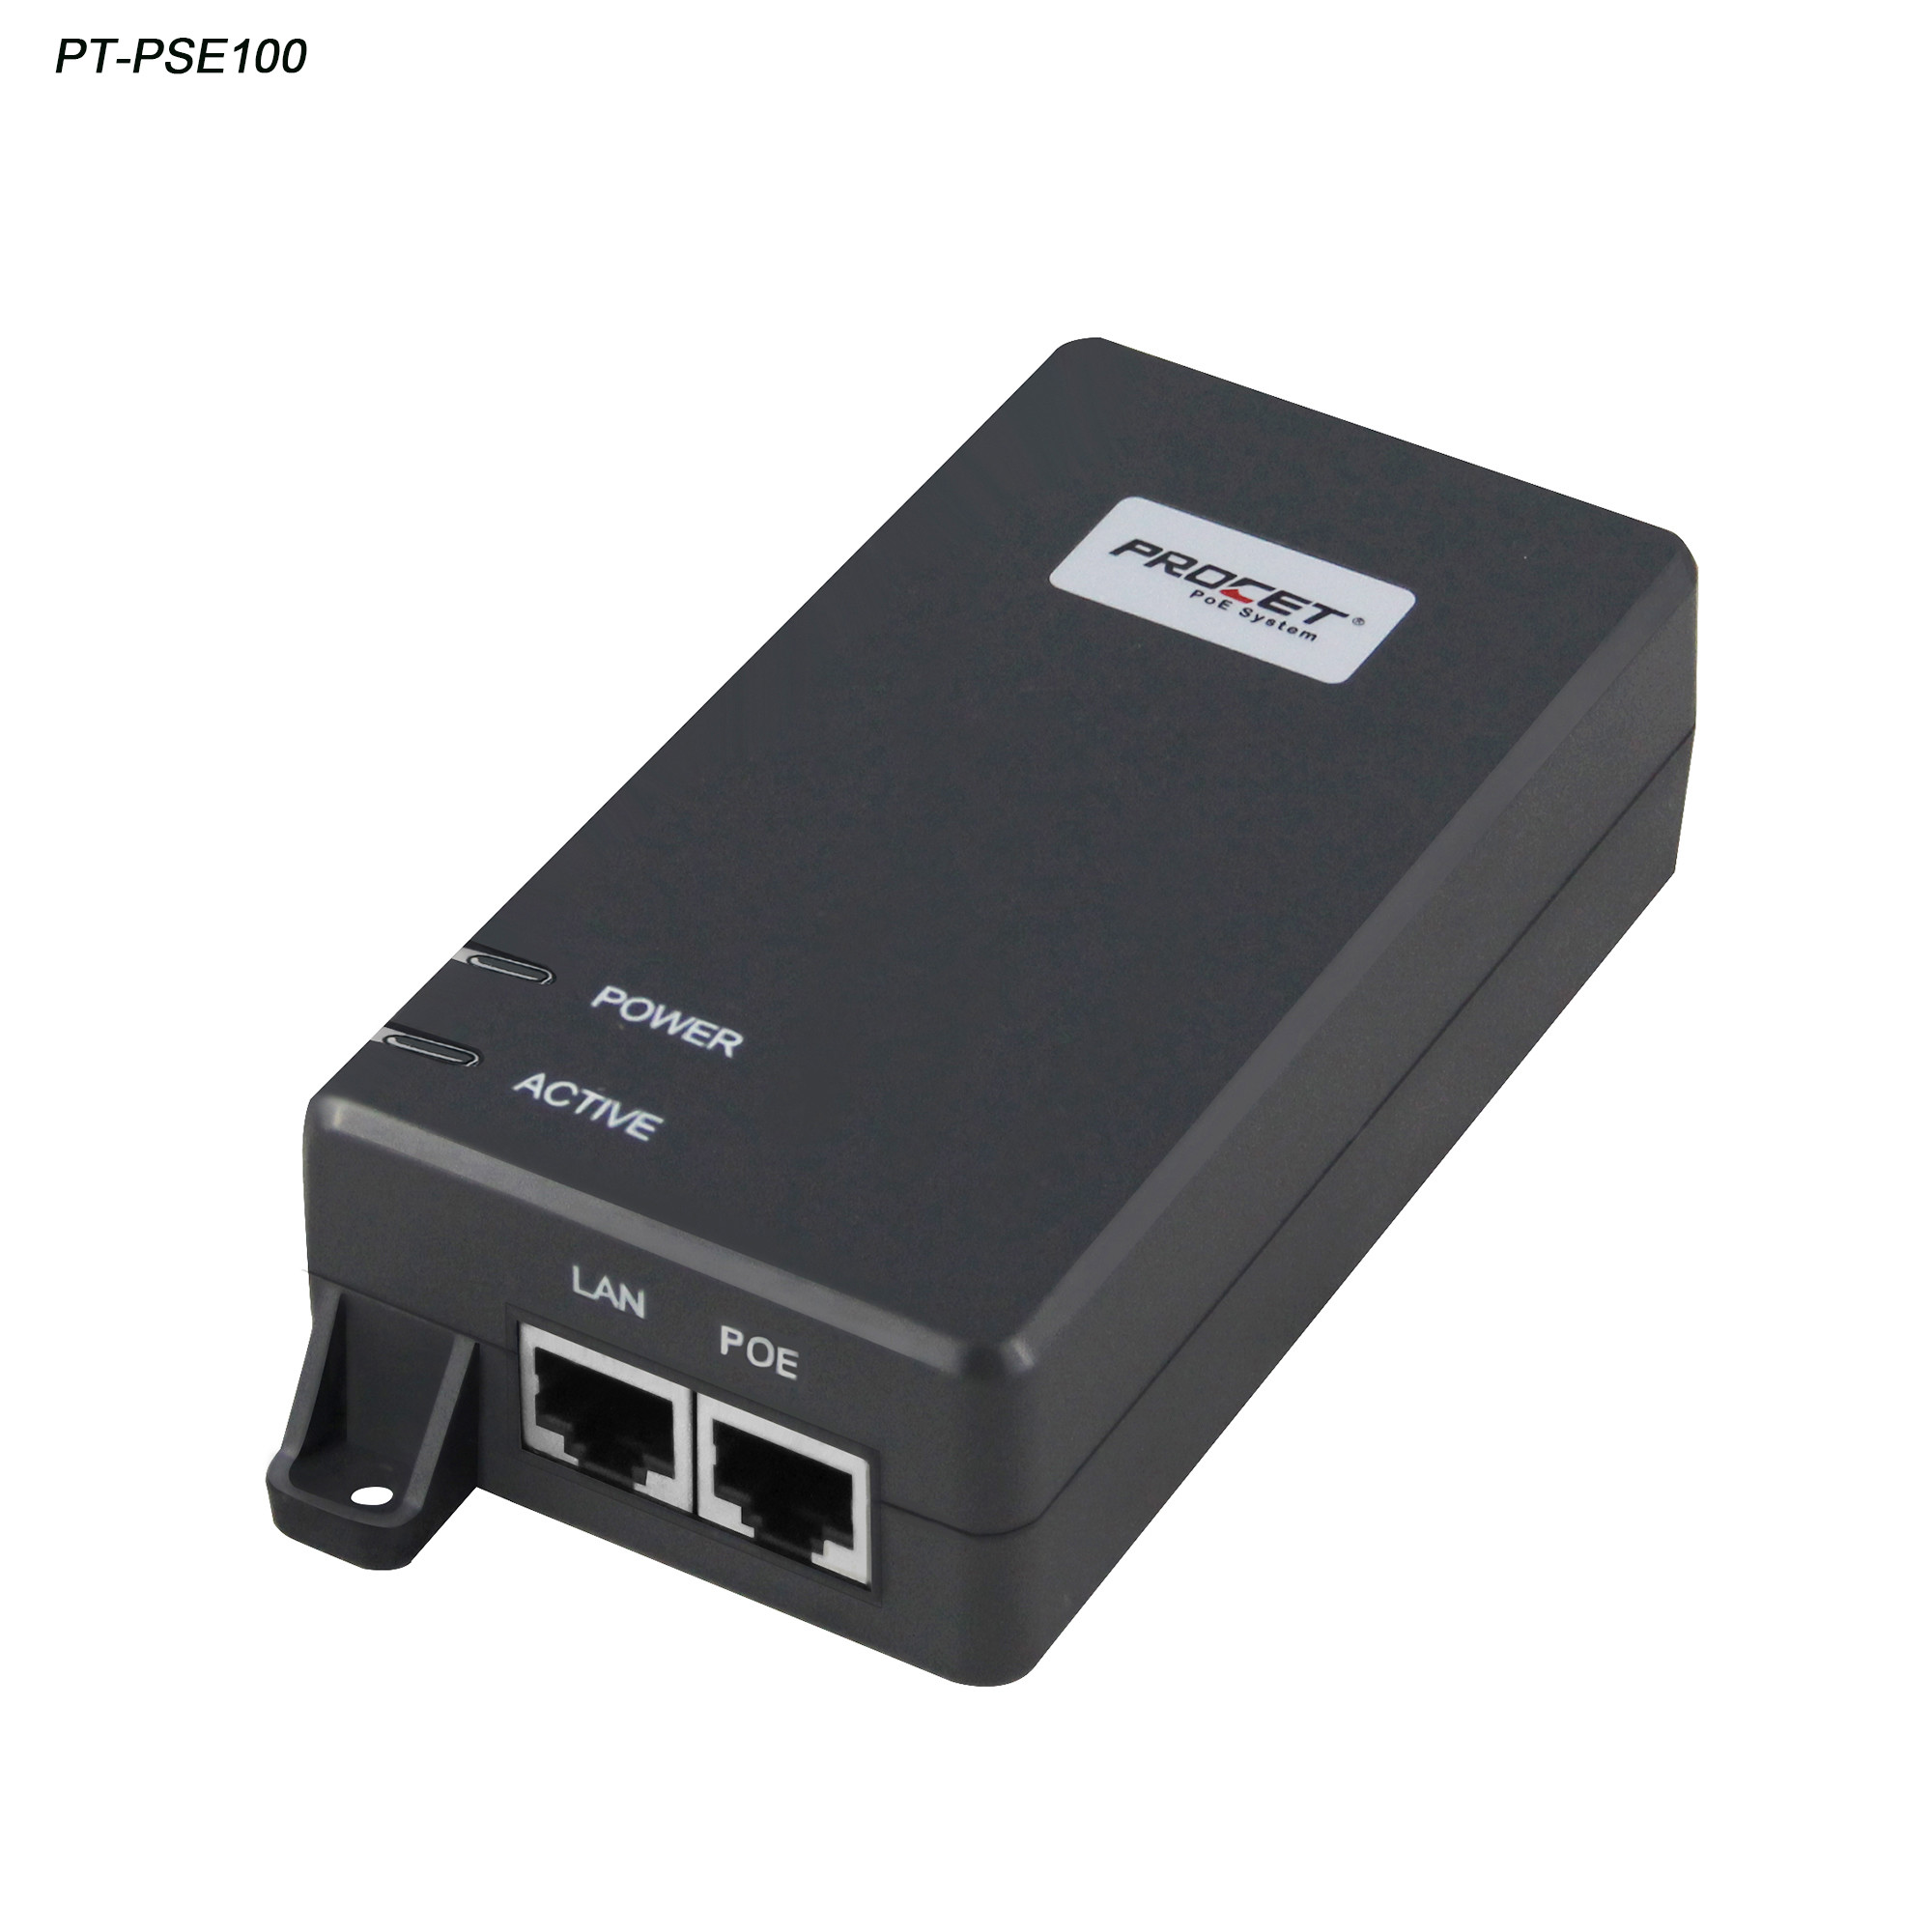 2 Pairs Ieee802 3at Poe Output 48vdc 0.63a Up To 2000 Meters Gigabit Device Ethernet